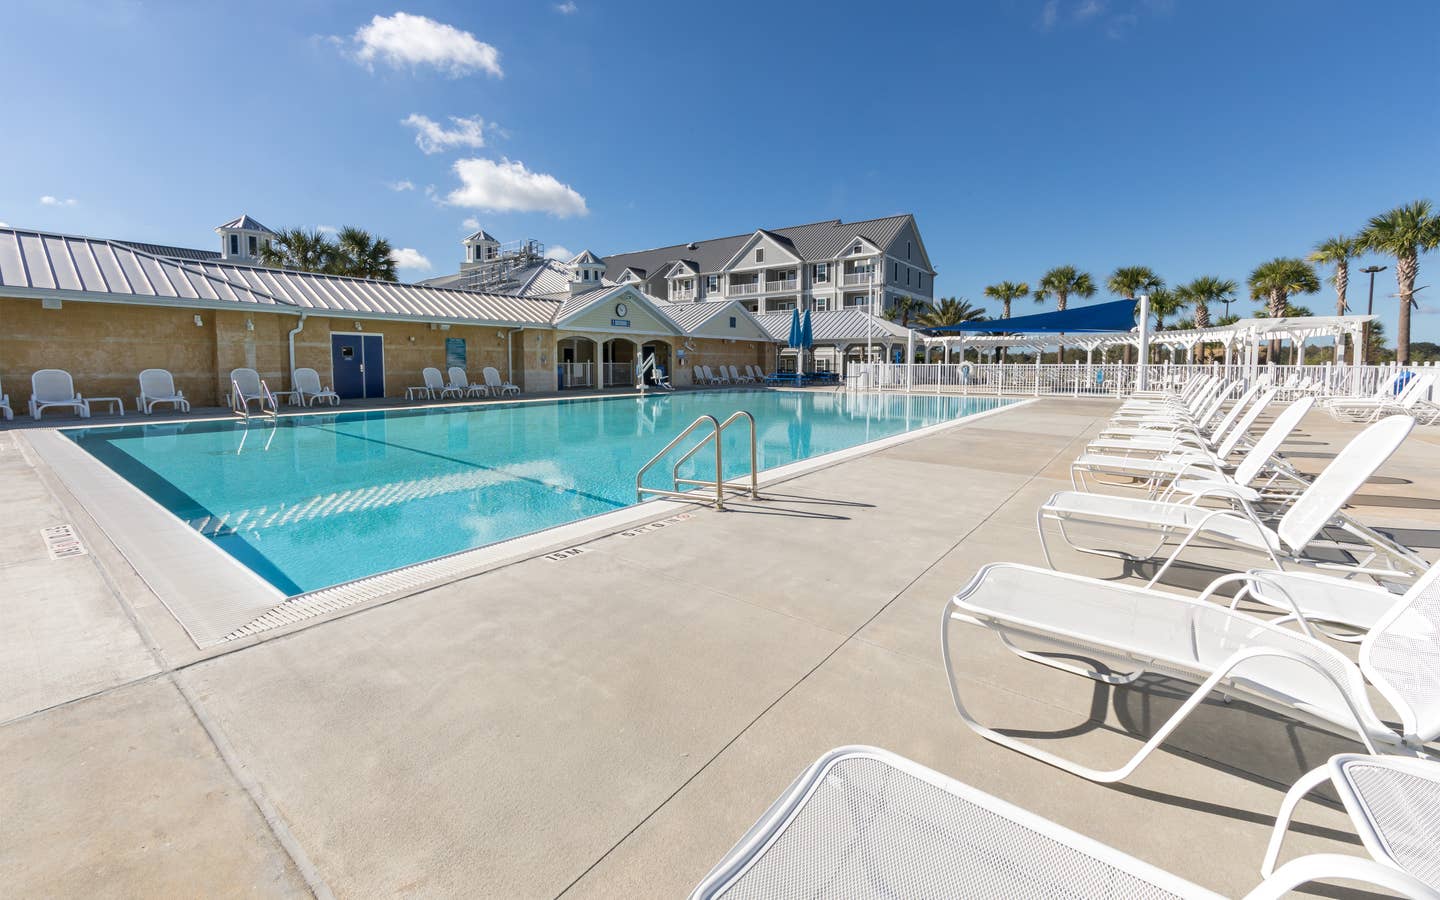 Outdoor pool with lounge chairs at Orlando Breeze Resort near Orlando, Florida.